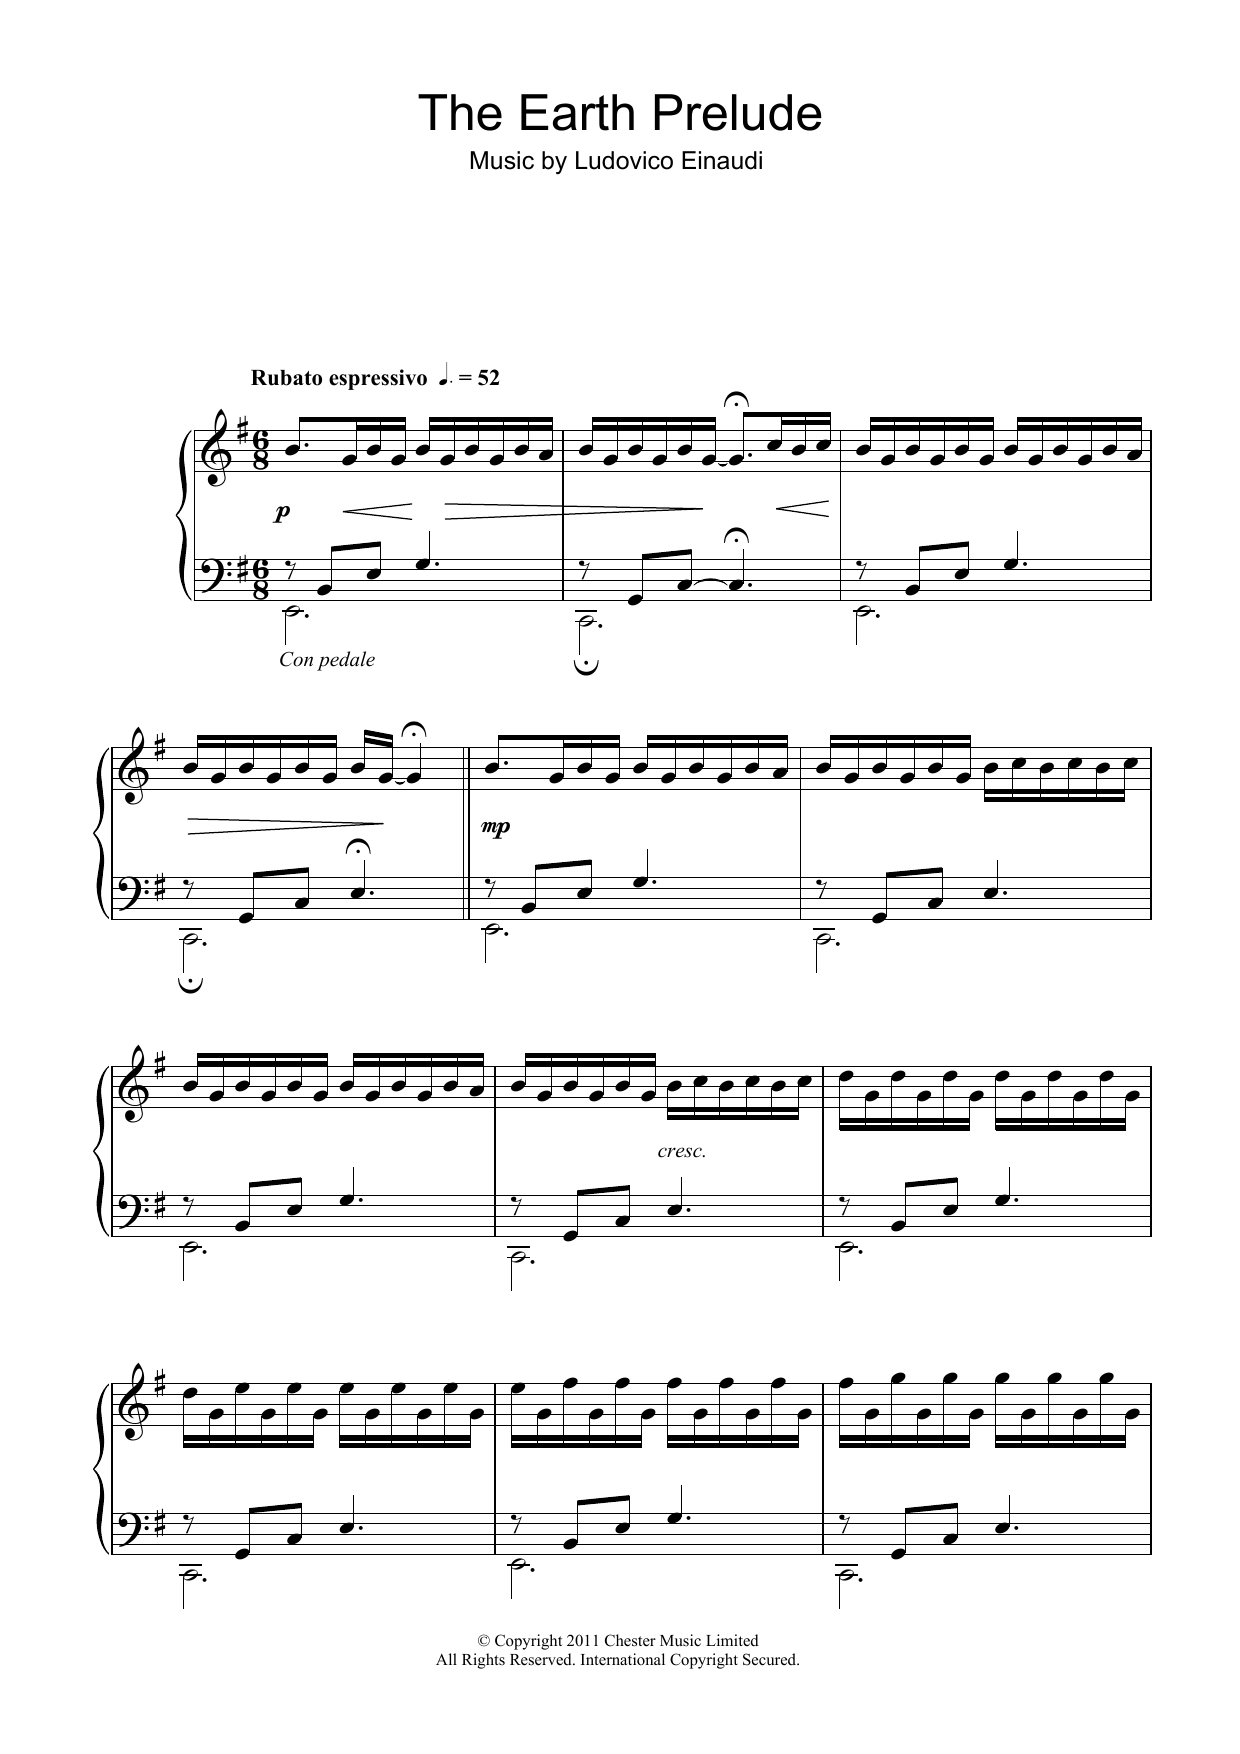 Ludovico Einaudi The Earth Prelude sheet music notes and chords. Download Printable PDF.